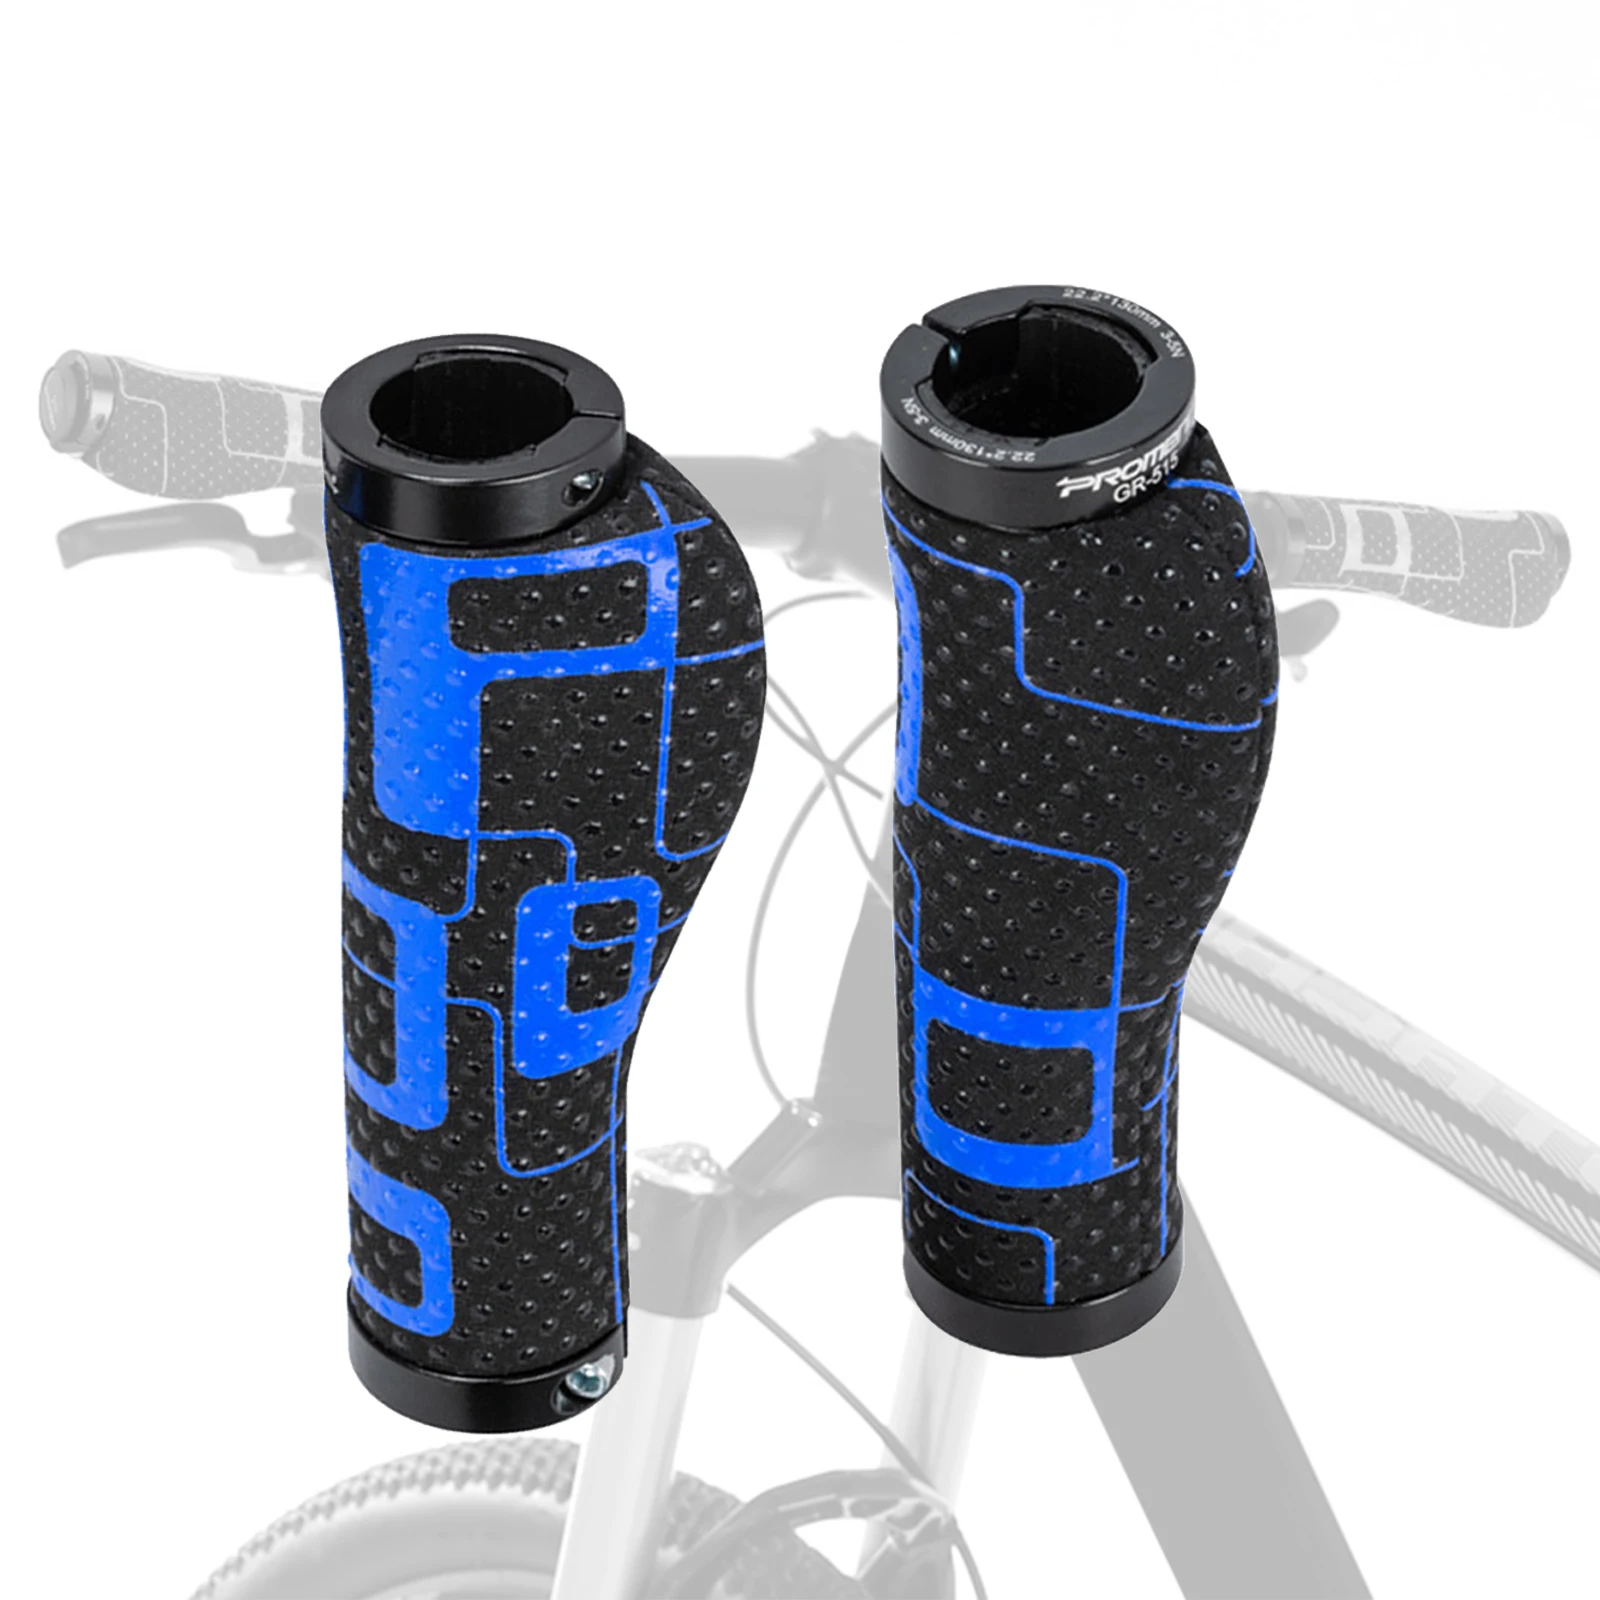 1 pair of silicone non-slip bicycle handles Comfortable handlebars are specially designed for mountain bicycle riding